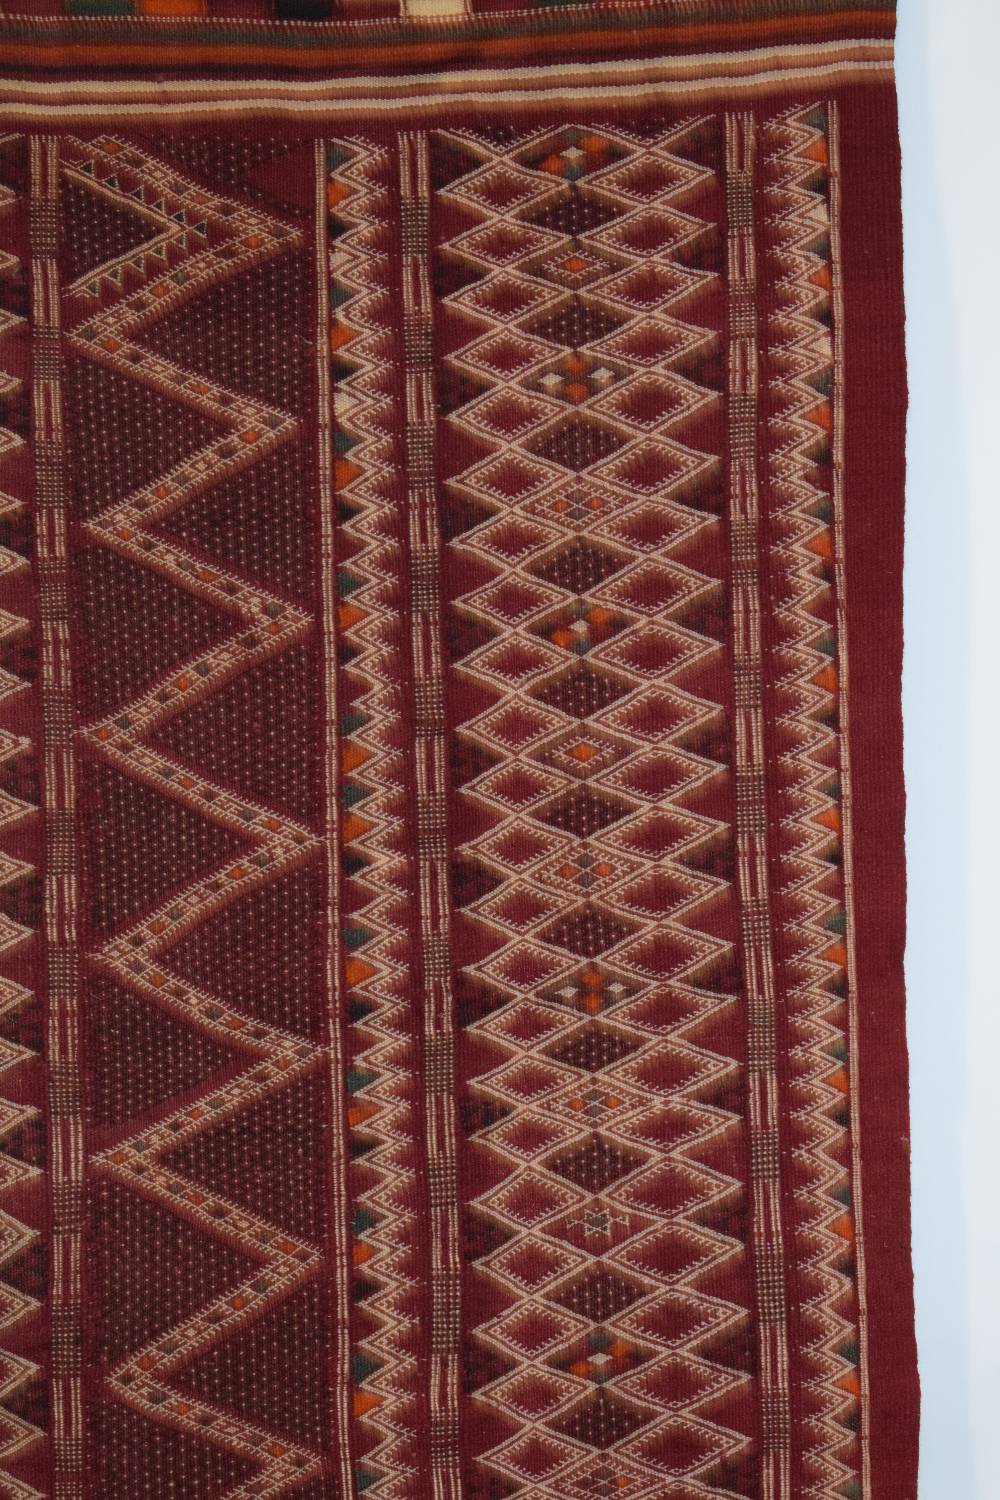 Middle Atlas flat-woven cover, Morocco, about 1940s, 9ft. X 4ft. 8in. 2.75m. X 1.42m. Woven in - Image 3 of 8